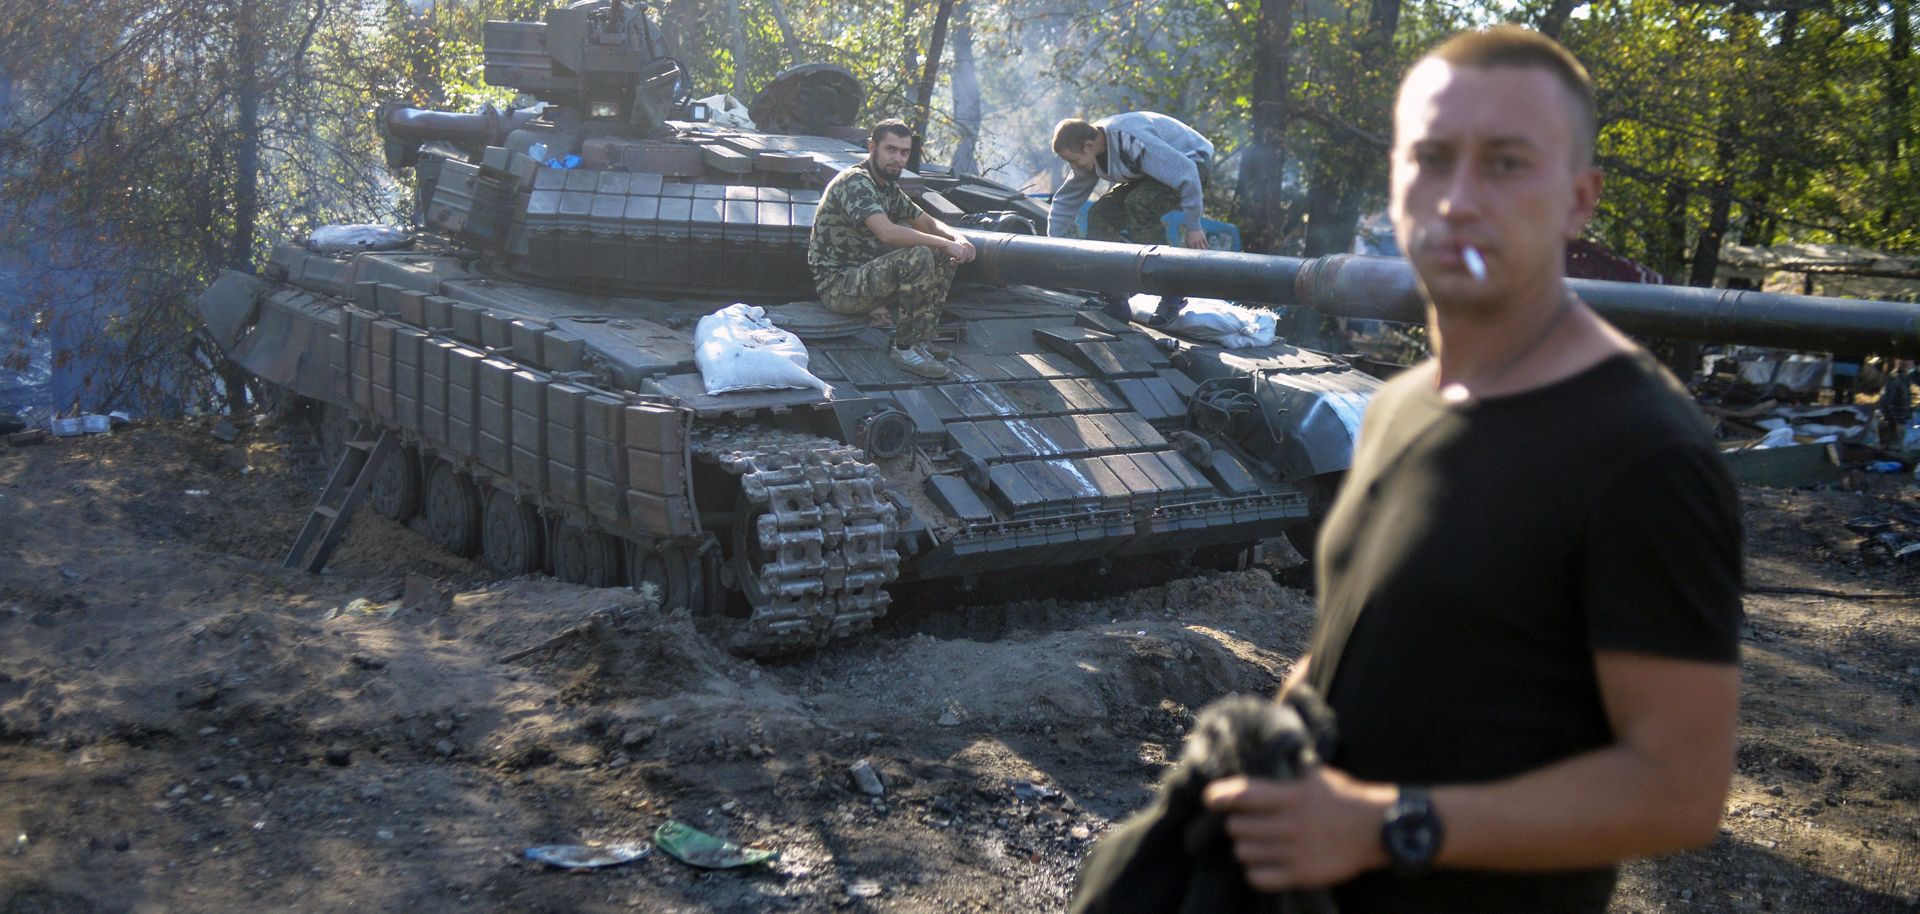 Ukrainian Separatists Fight Back to Maintain Supply Lines